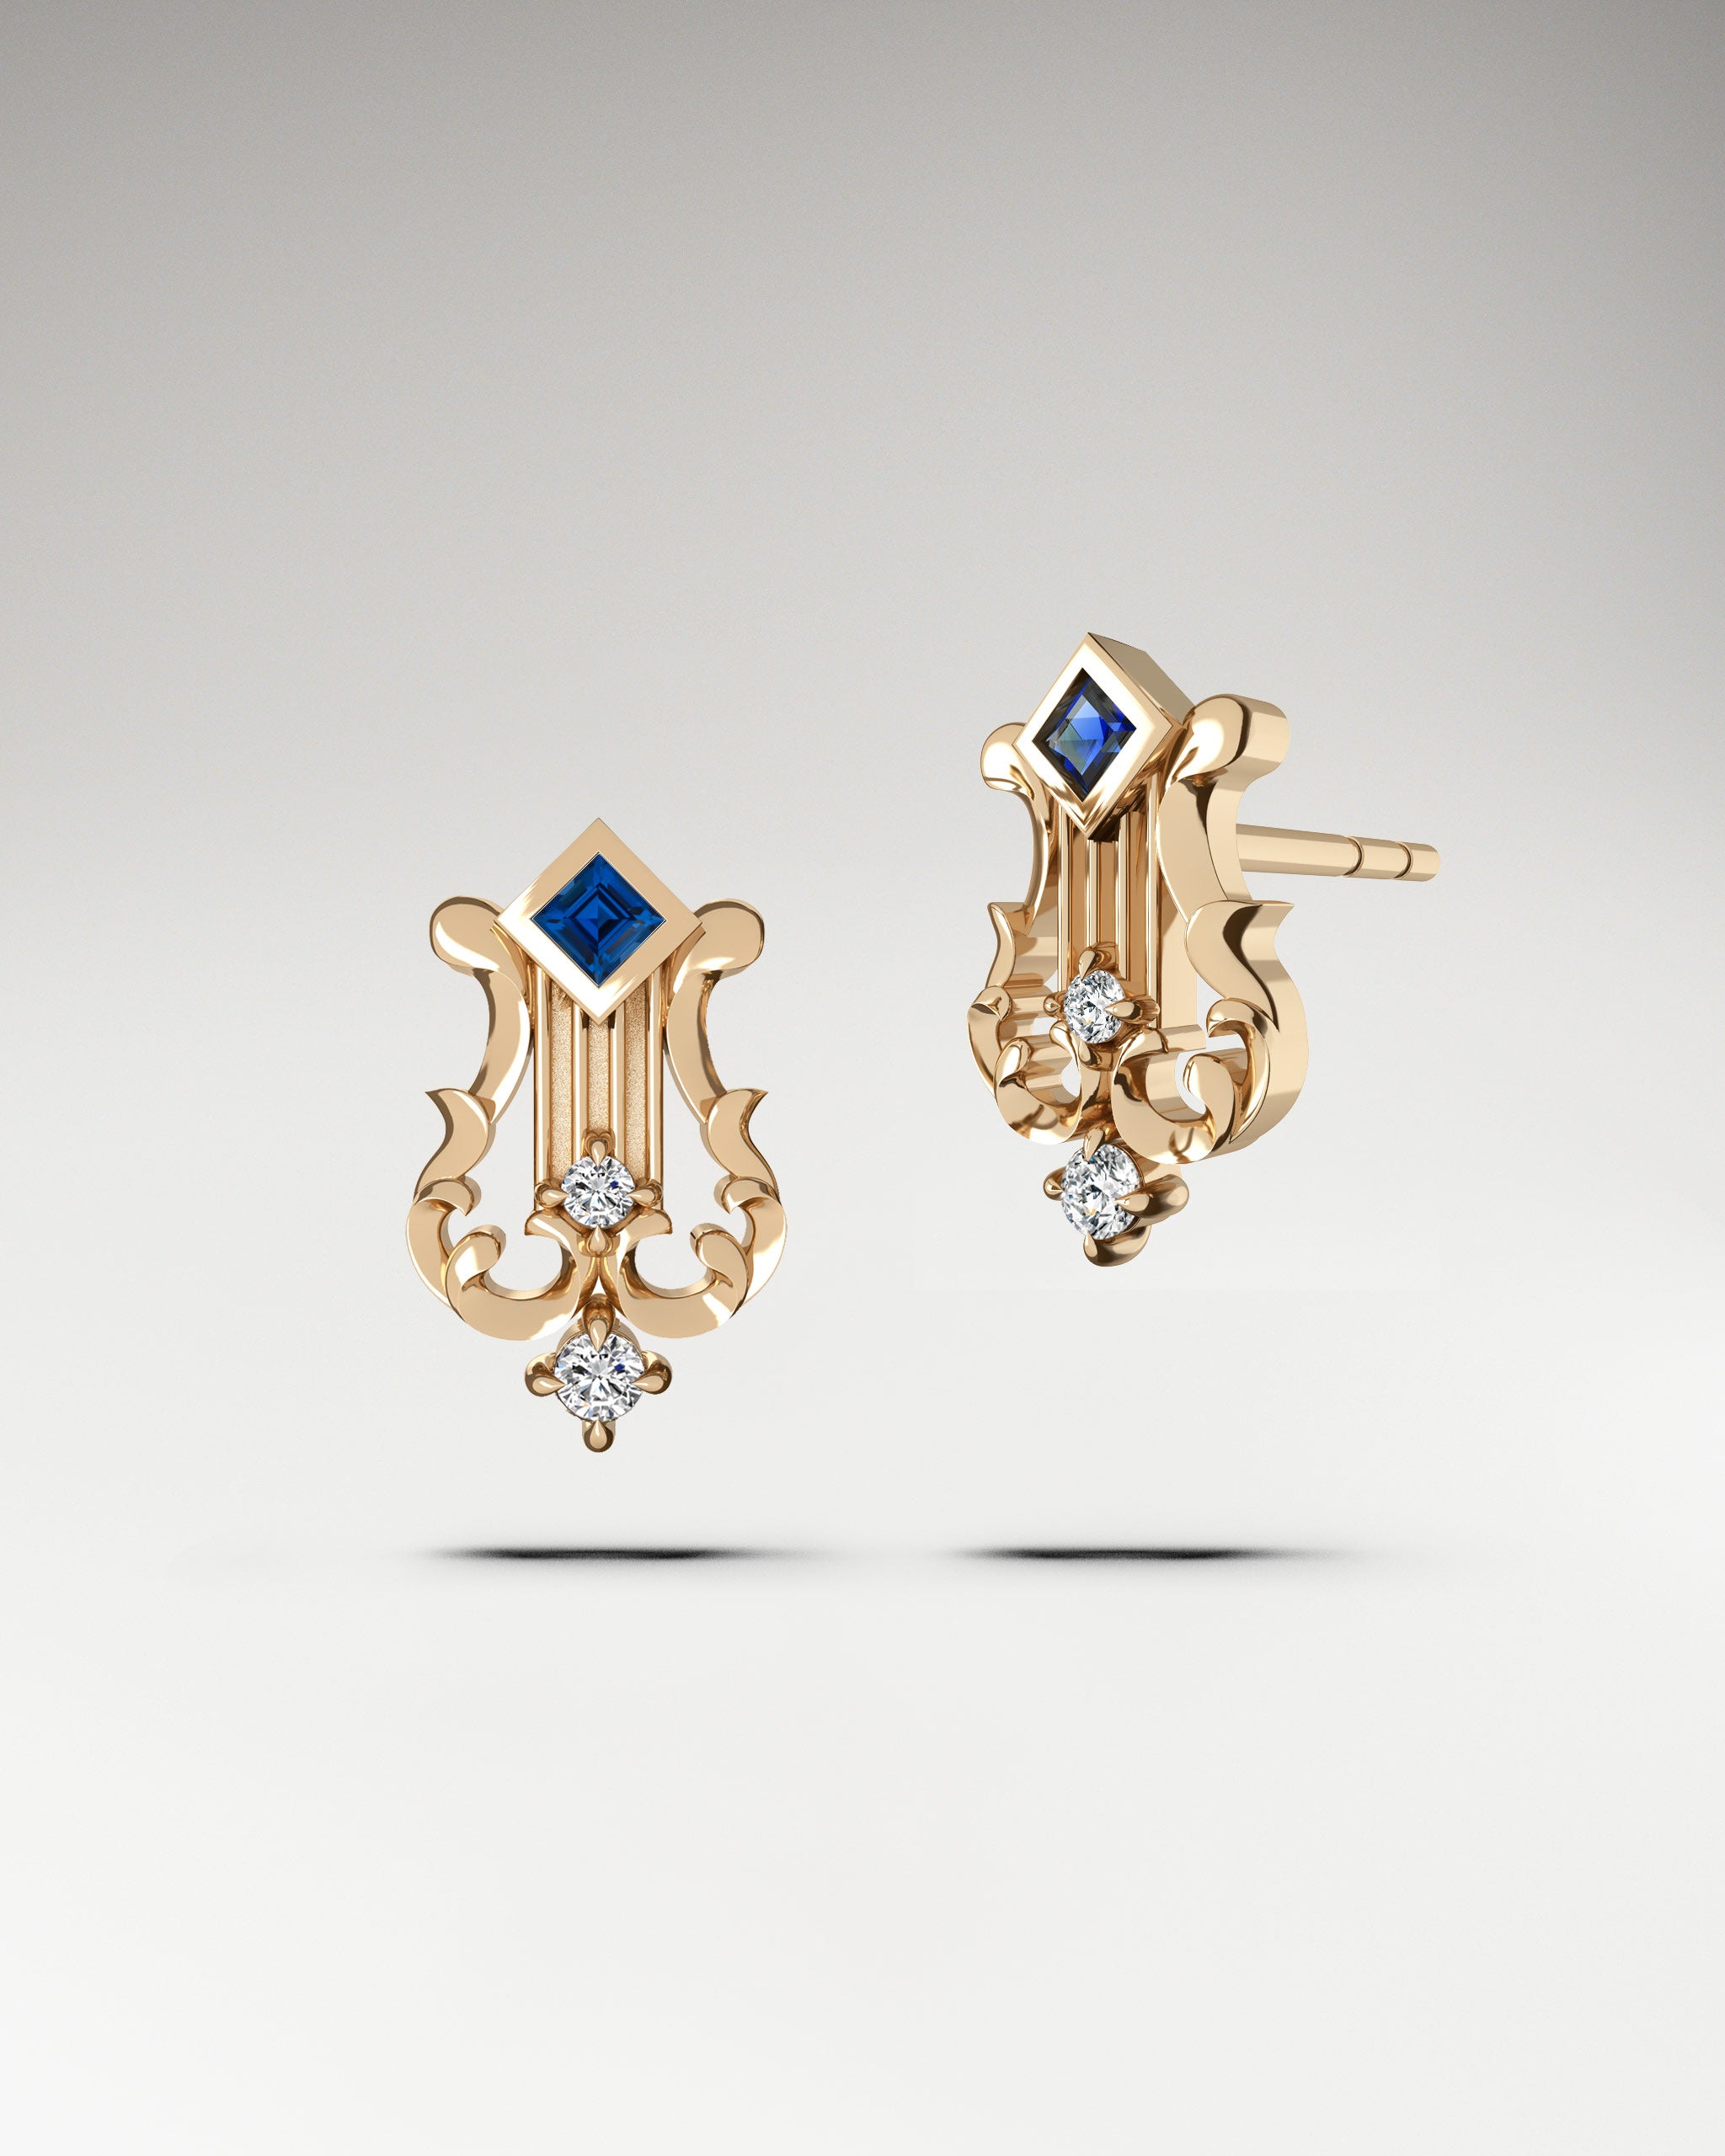 Lyre shapped earrings made in gold with diamonds and blue sapphire